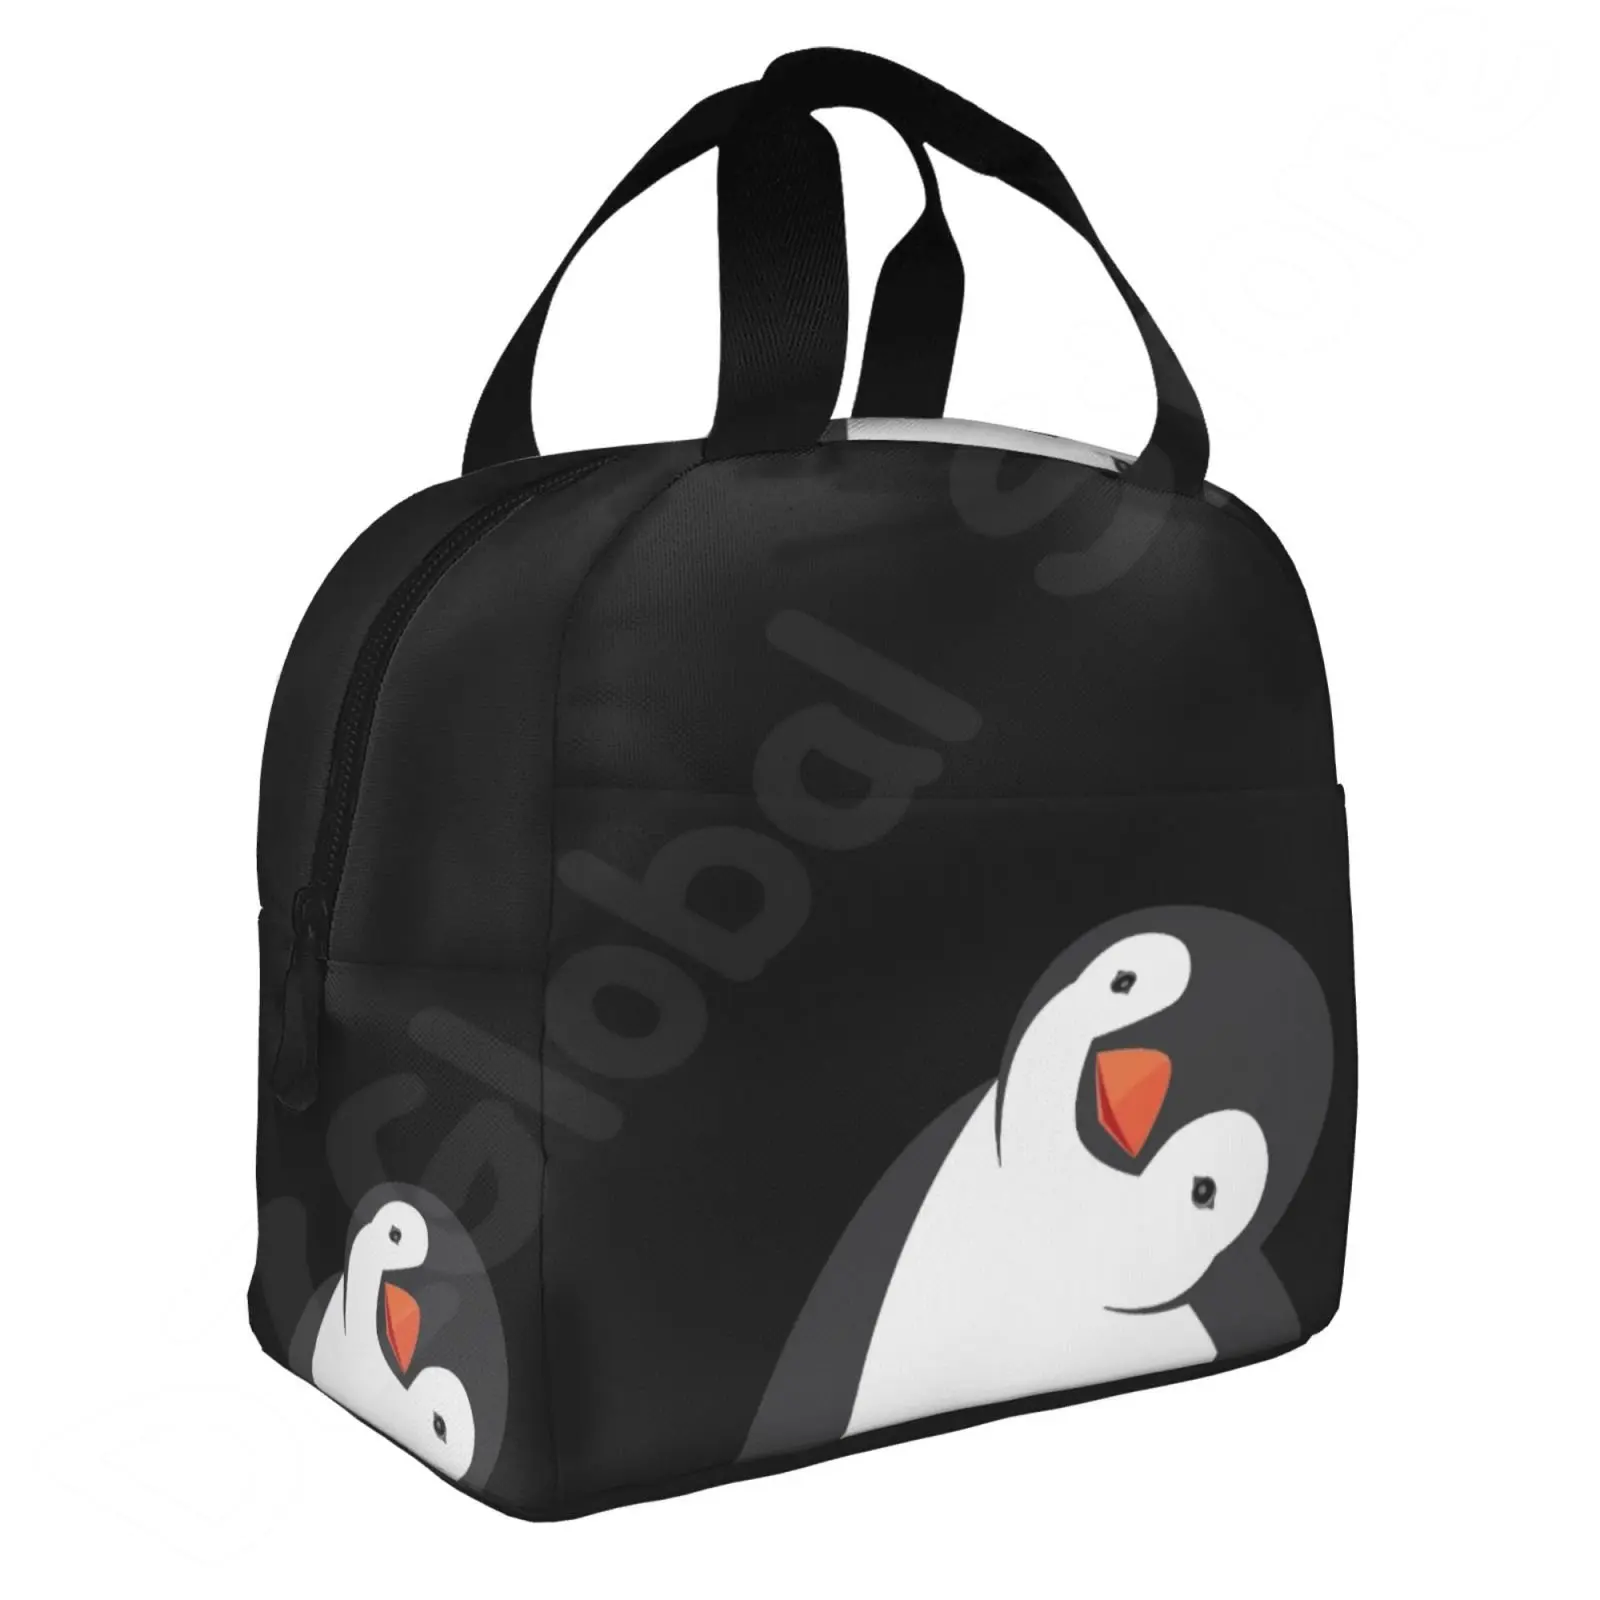 

Cute Penguins Print Thermal Lunch Bag Reusable Insulated Cooler Tote Box Funny Container Lunch Holder Portable Bento Bag